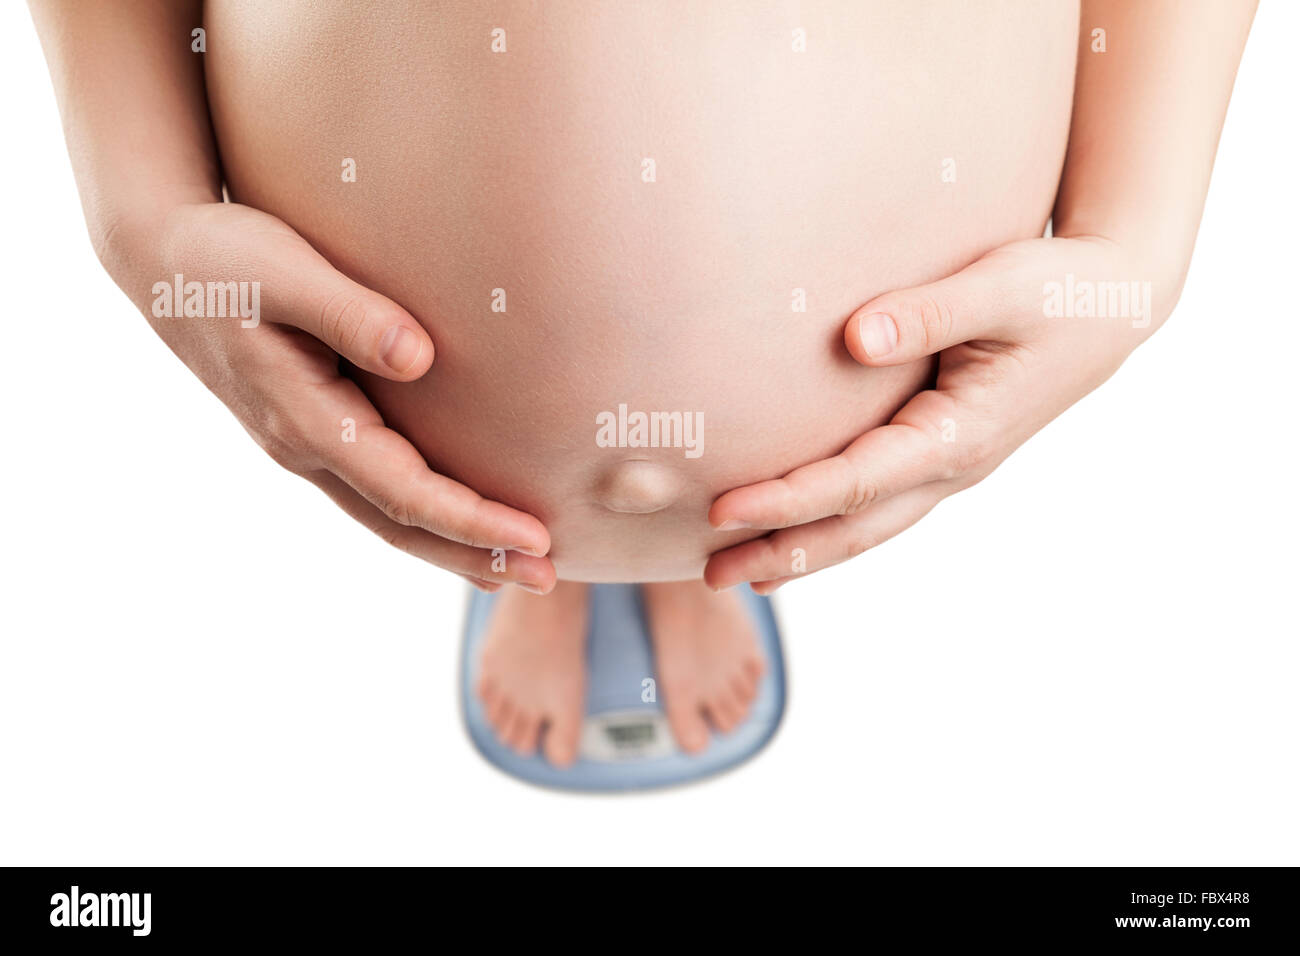 Pregnant woman standing on weight balance Stock Photo